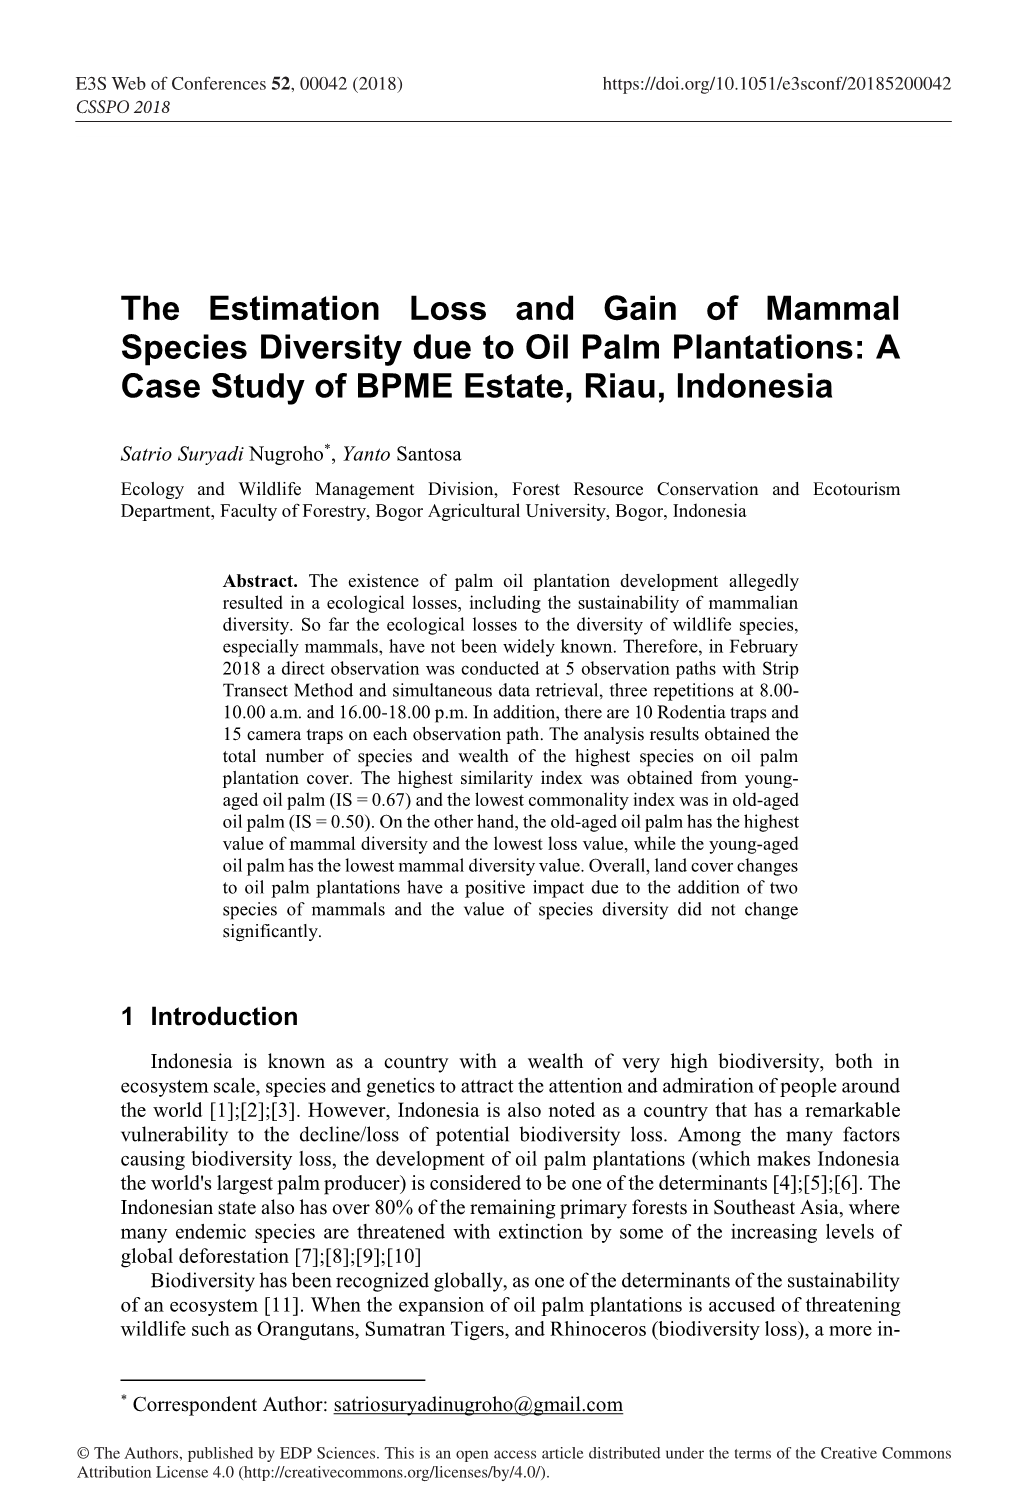 The Estimation Loss and Gain of Mammal Species Diversity Due to Oil Palm Plantations: a Case Study of BPME Estate, Riau, Indonesia